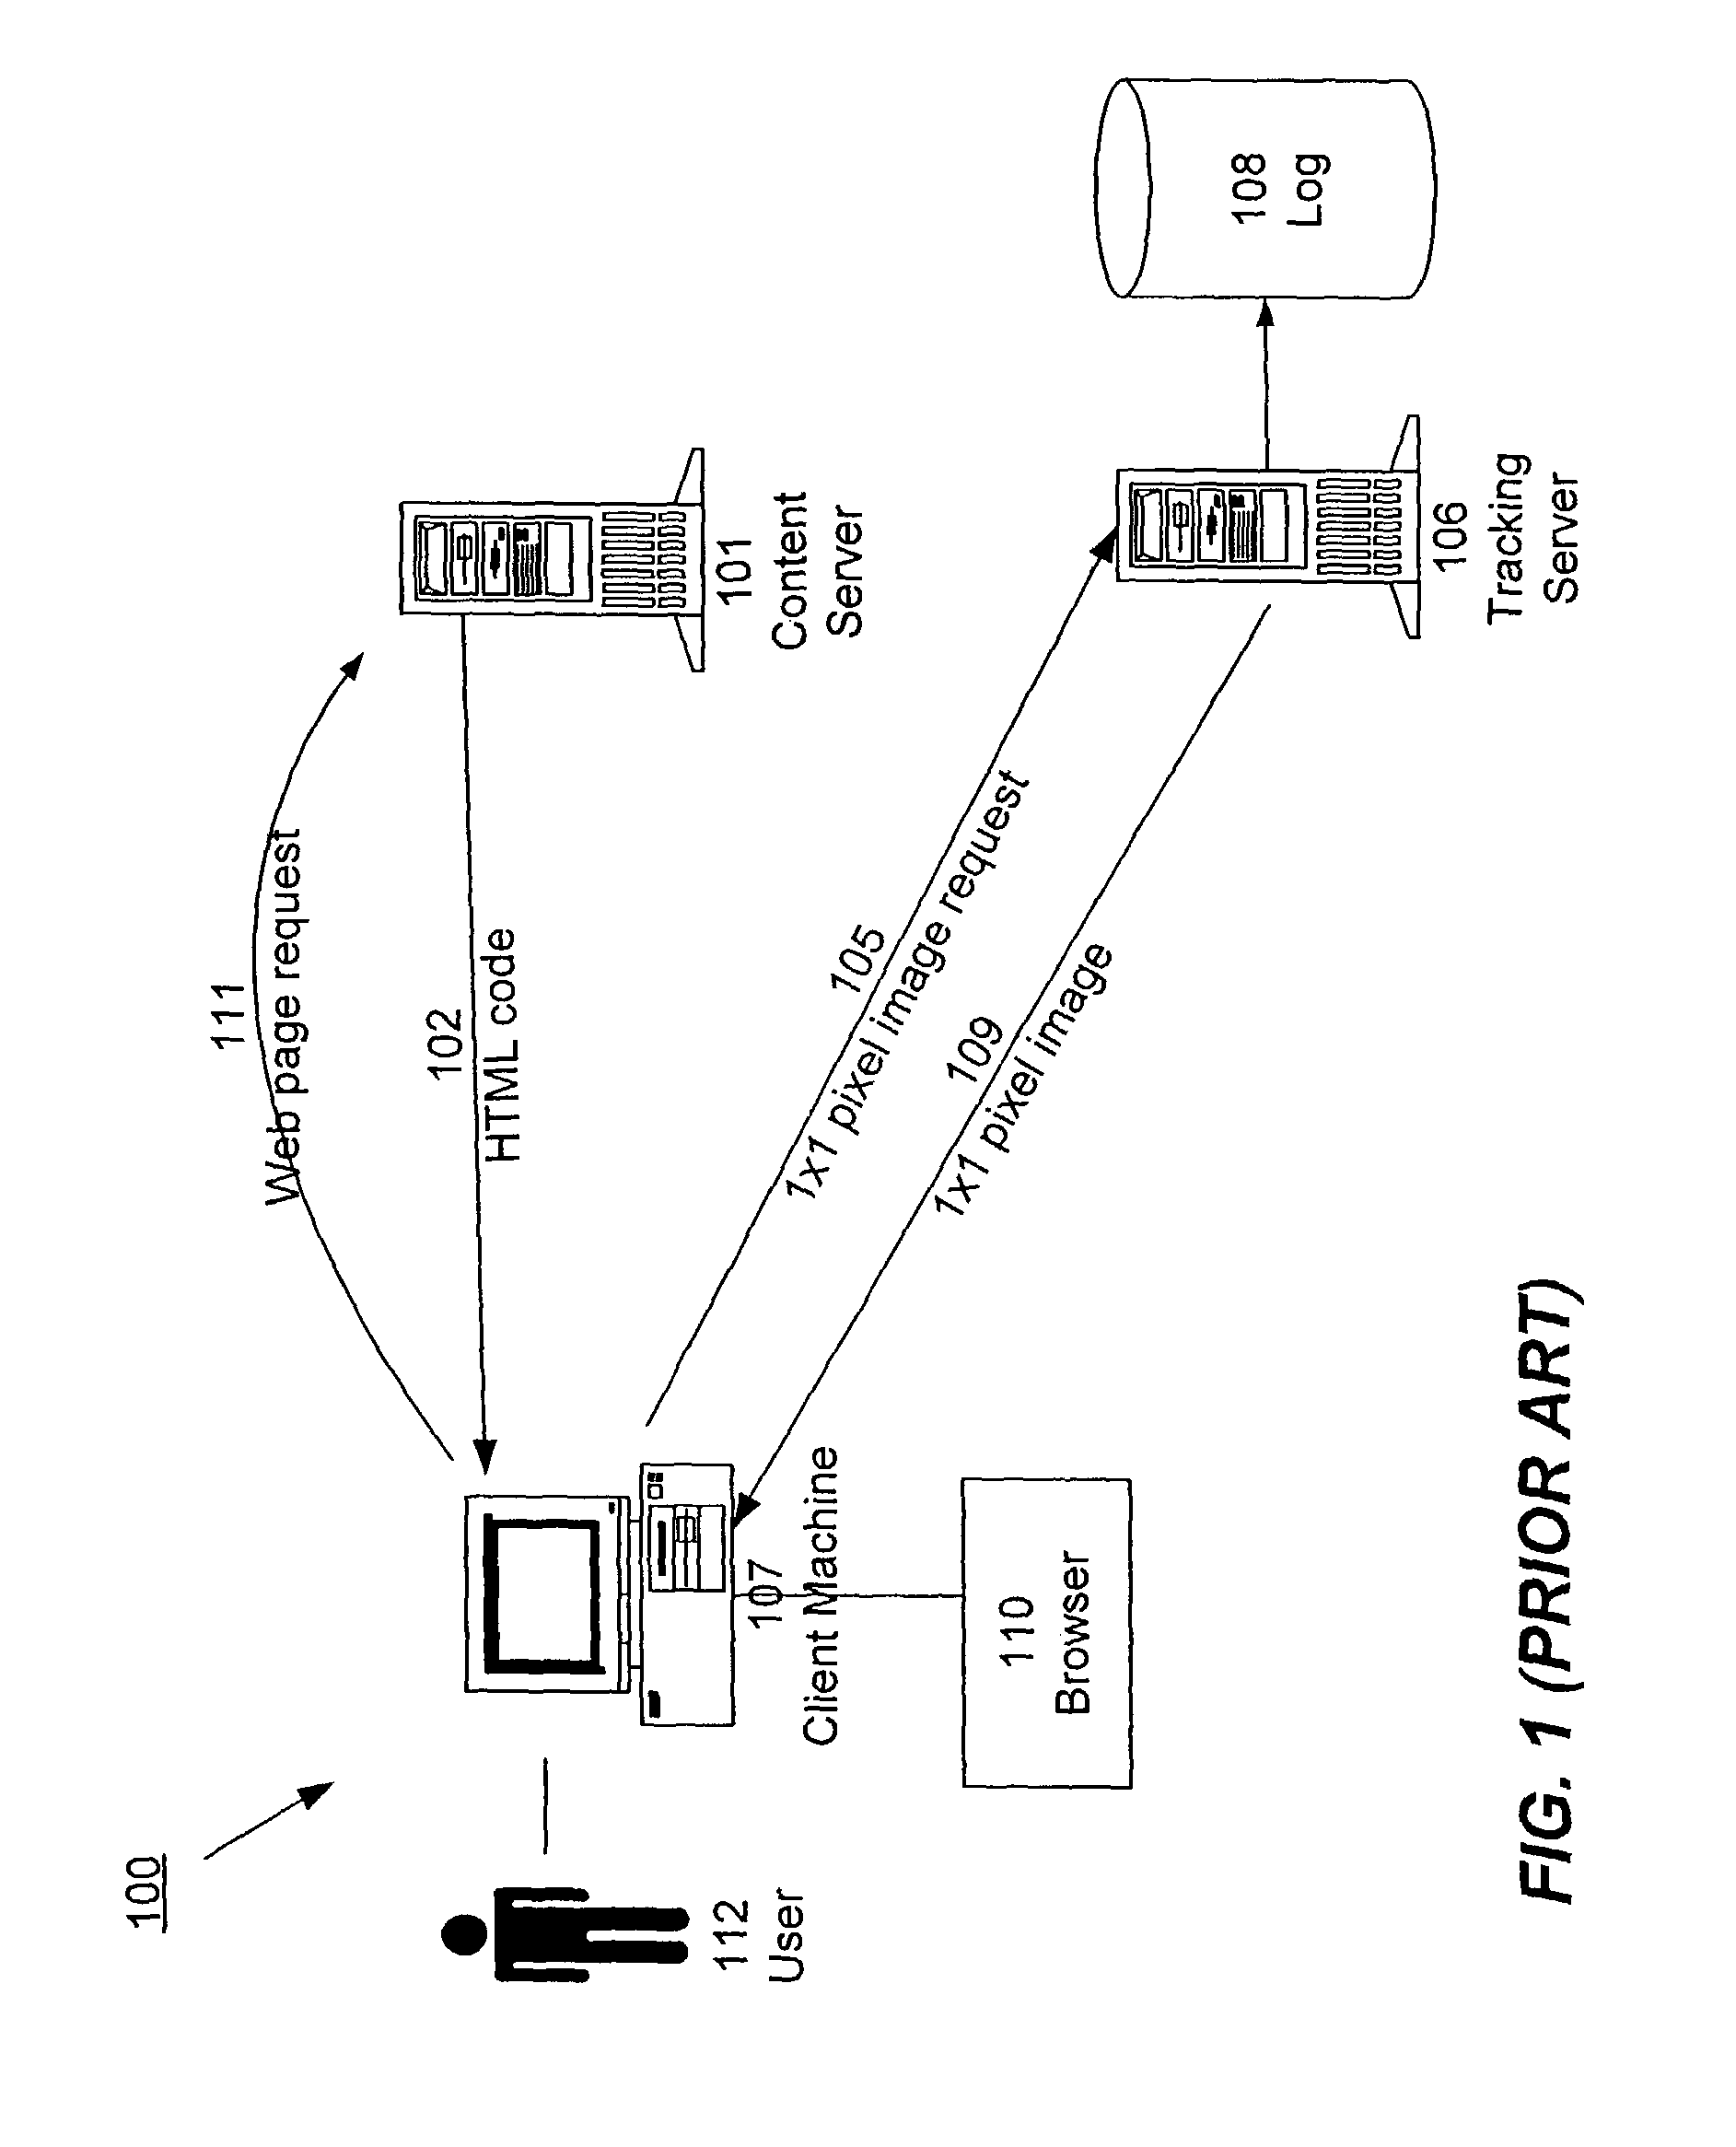 Distributed data collection and aggregation